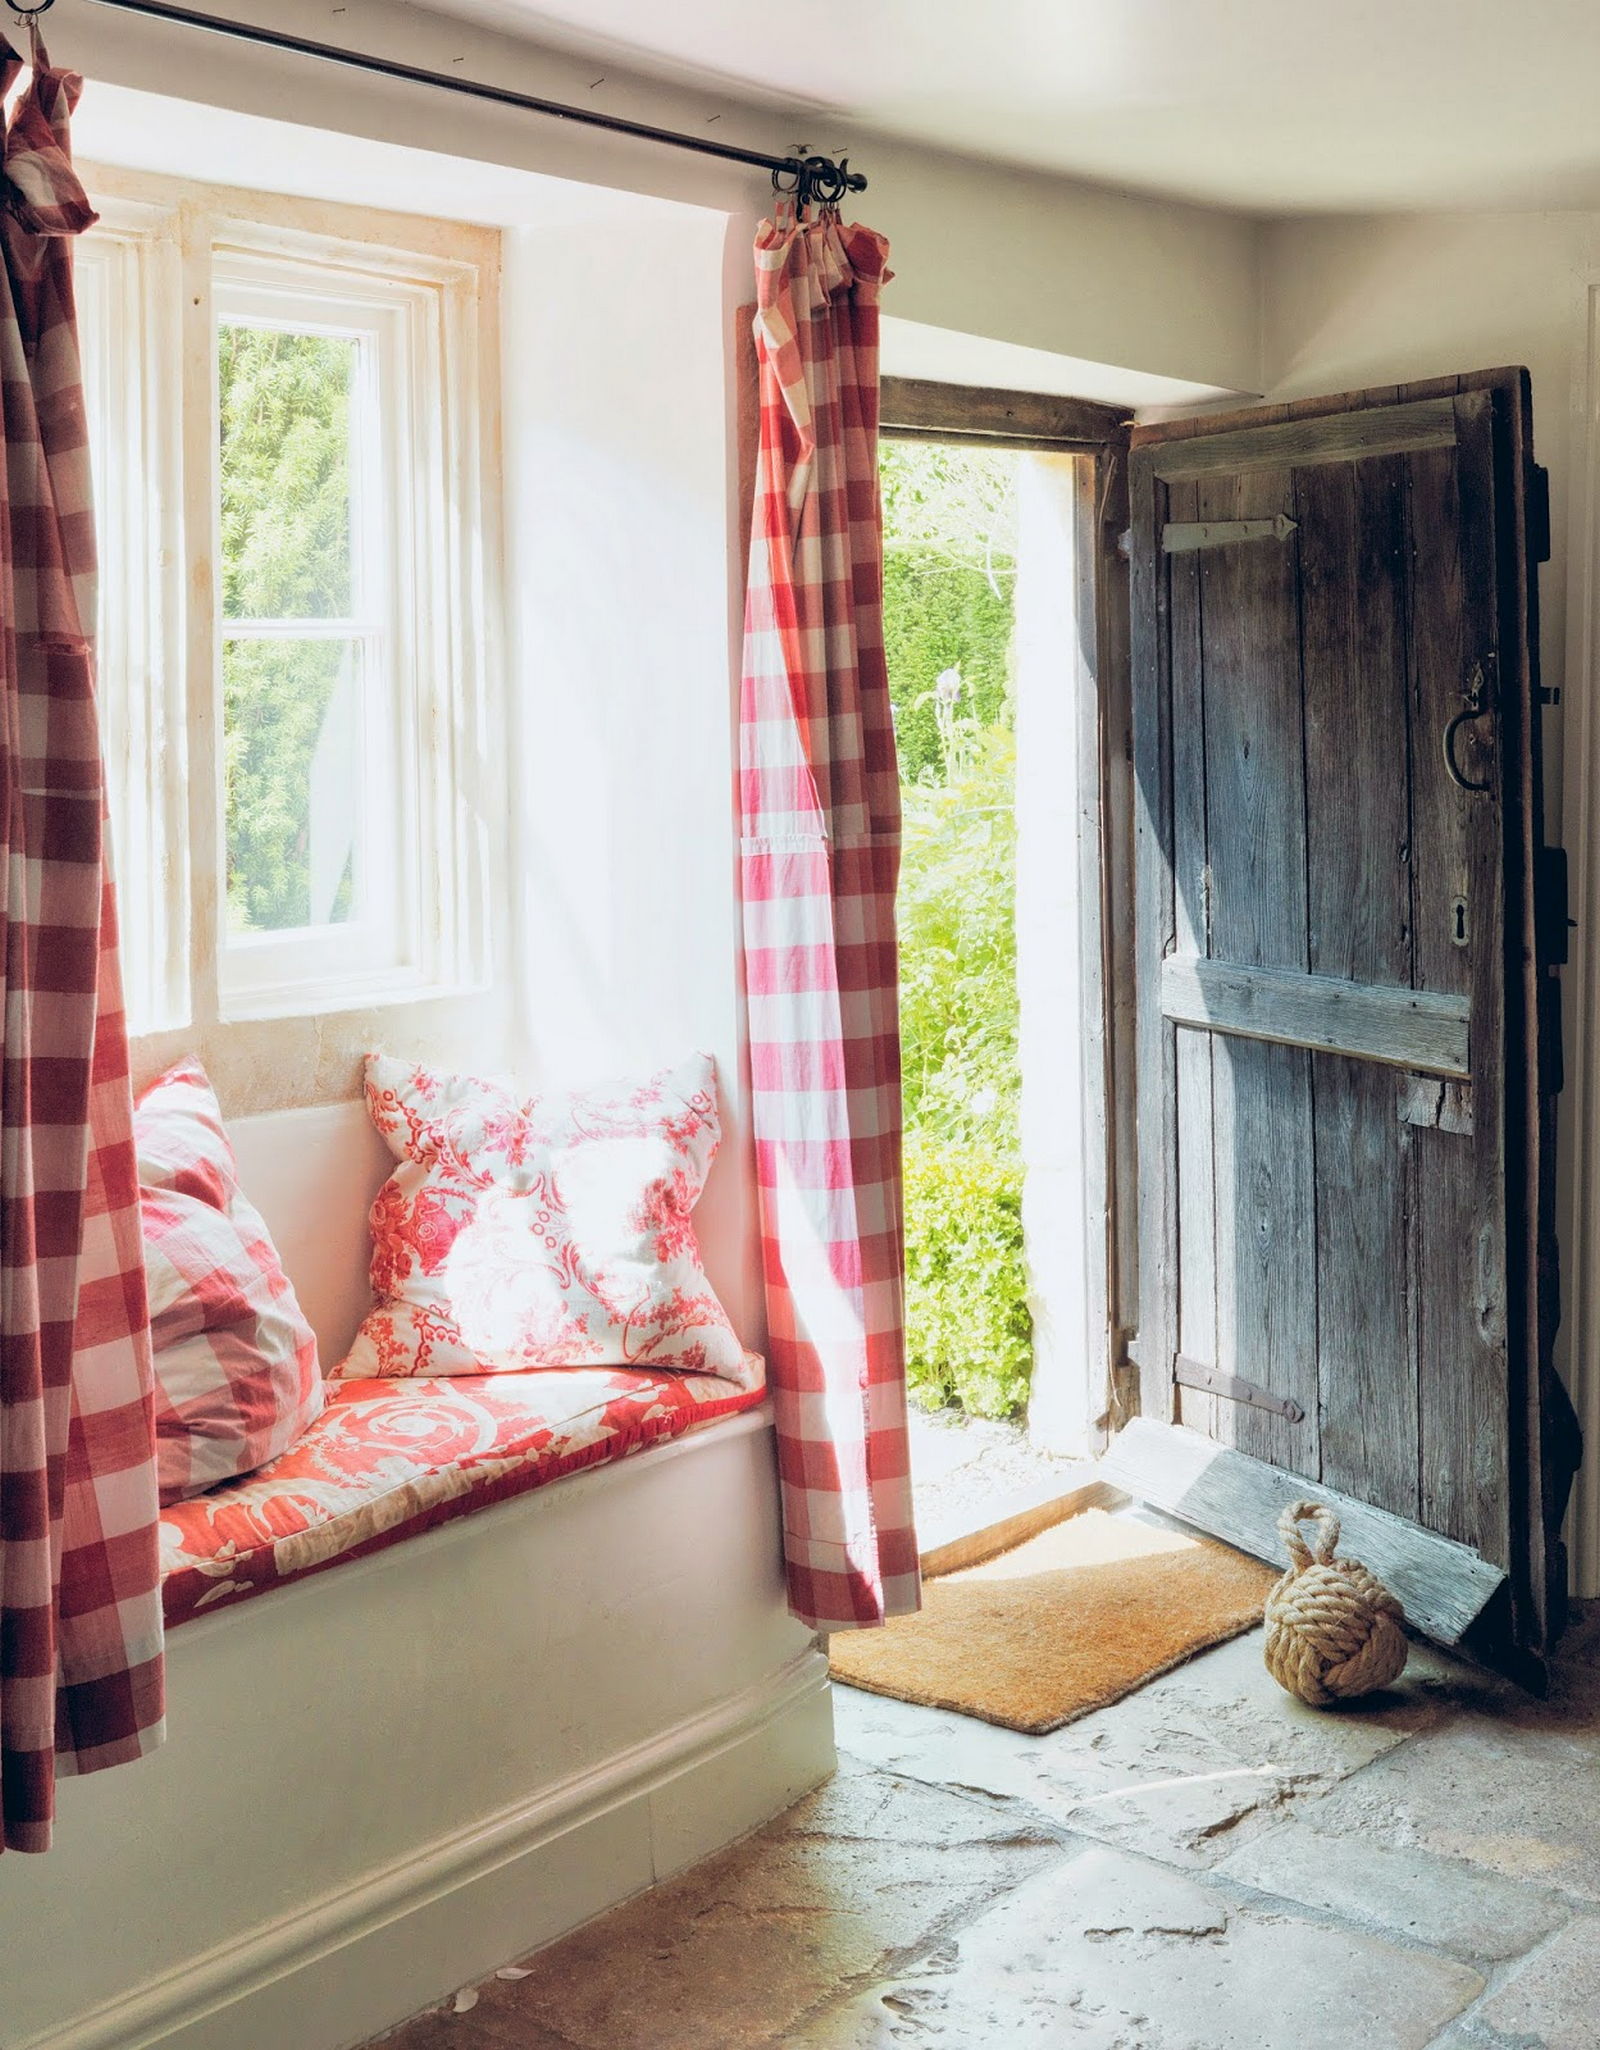 Cozy country style curtains